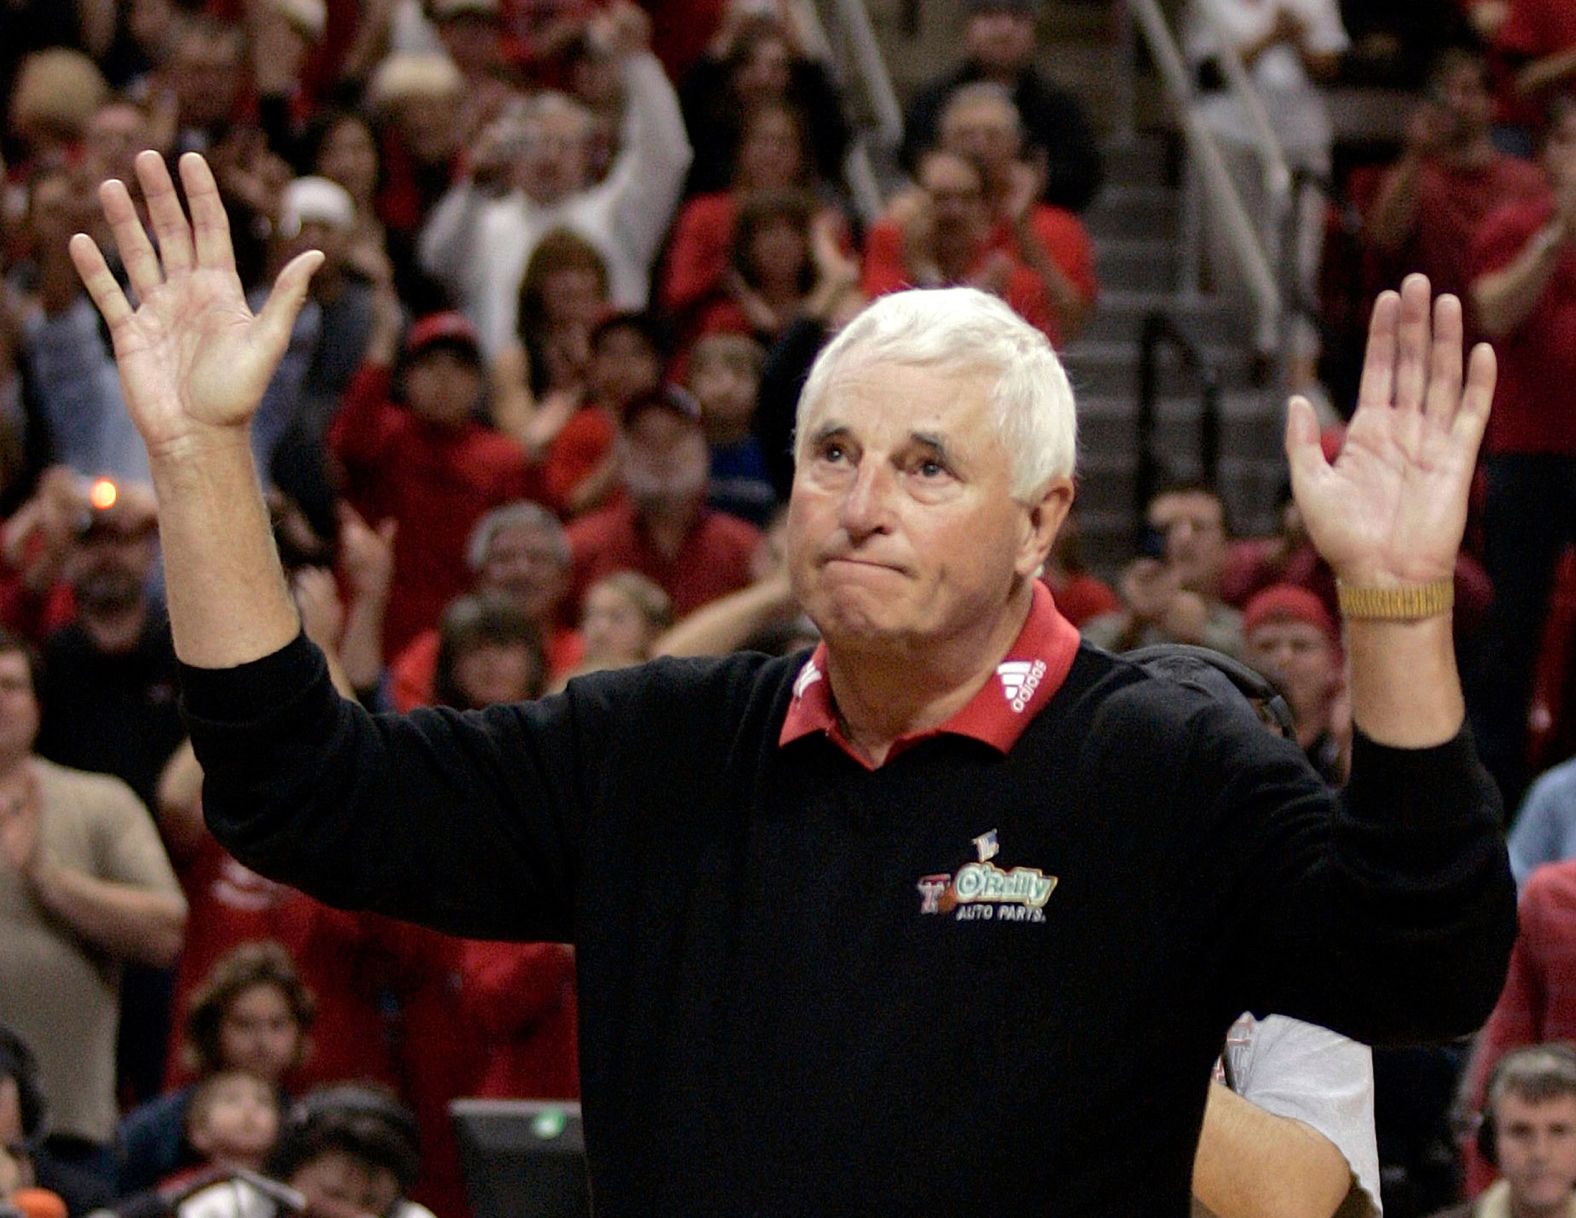 Knight, who coached at Texas Tech from 2001 to 2008, gestures to the crowd after his team defeated the New Mexico Lobos to give Knight 880 wins in 2007.